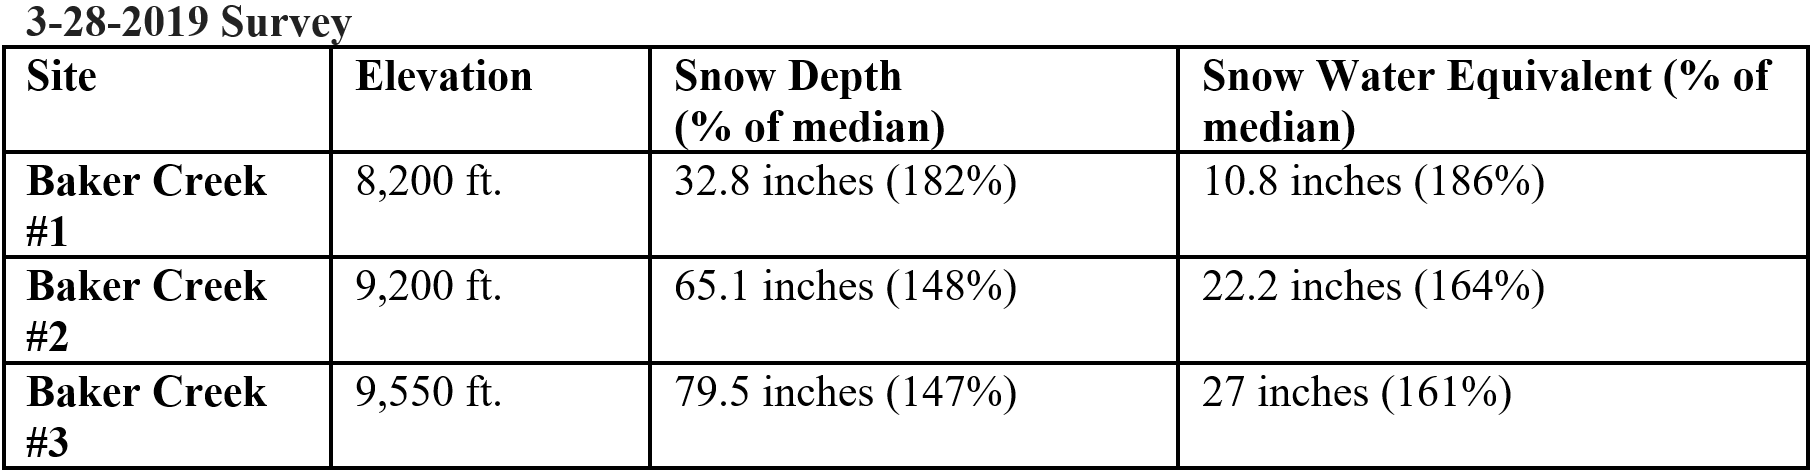 Table 1. March 28, 2019 Snow Survey Results